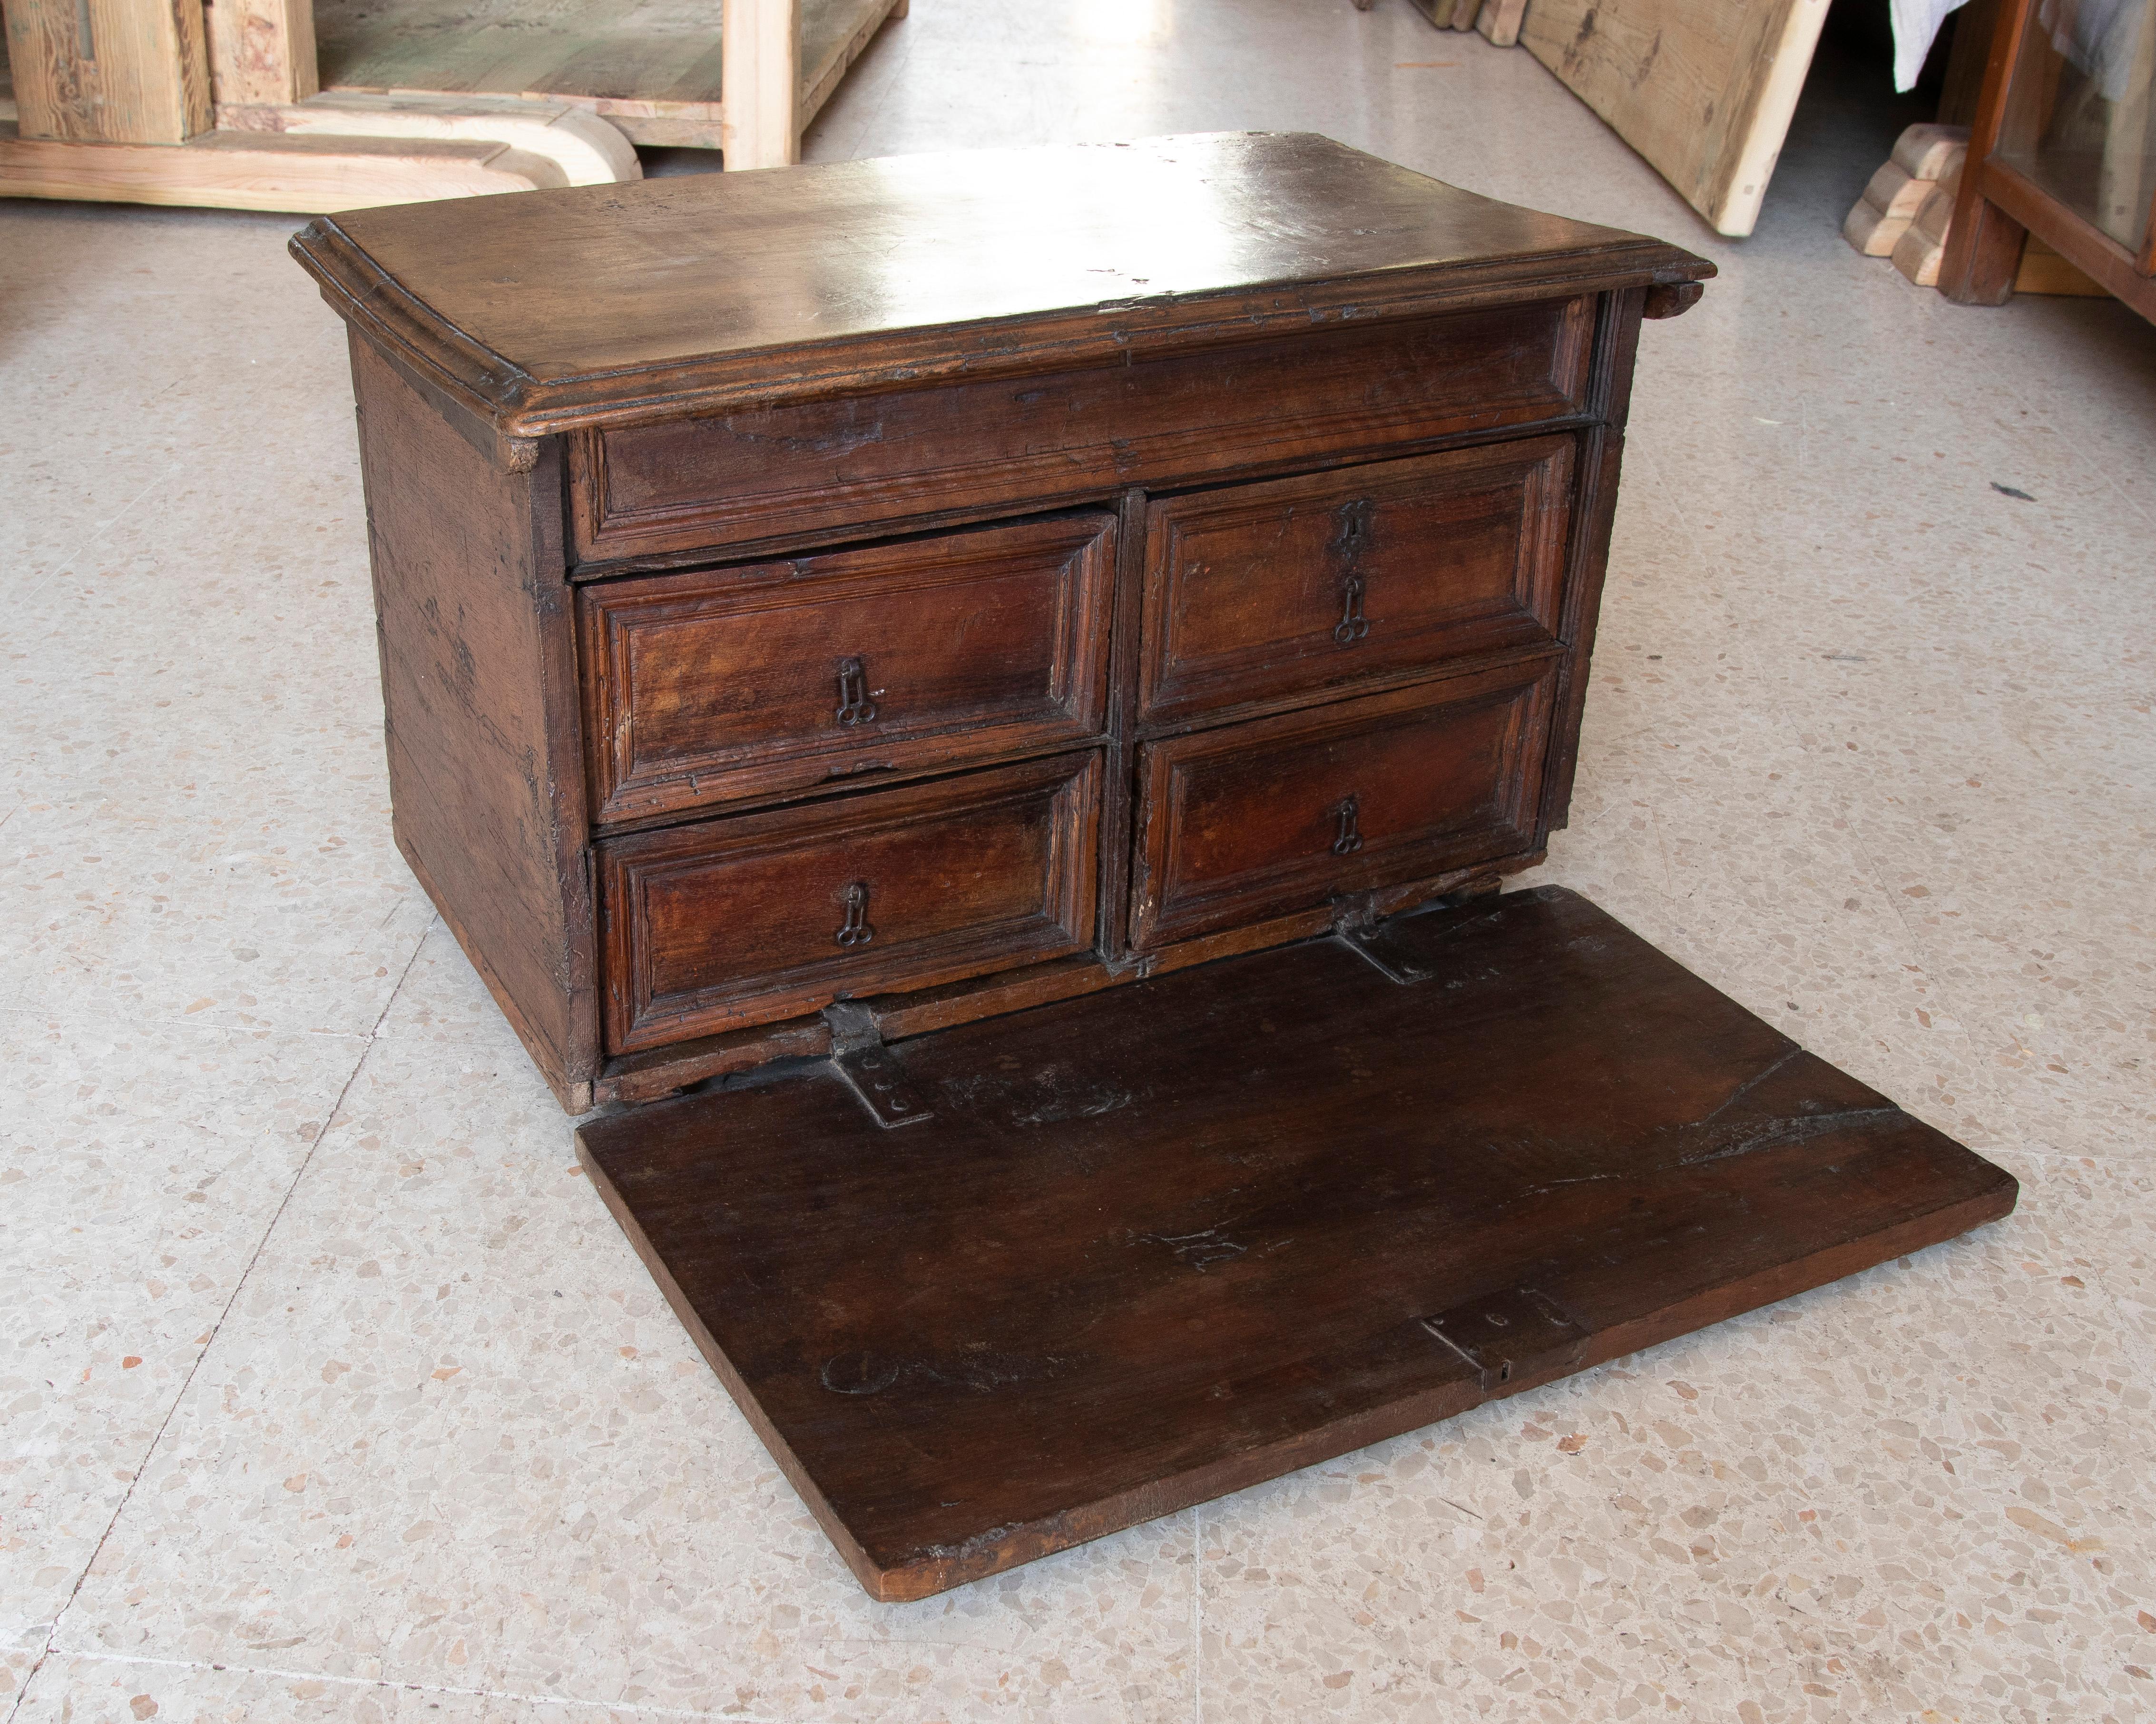 18th Century Spanish walnut writing desk with door and drawers in the Interior.